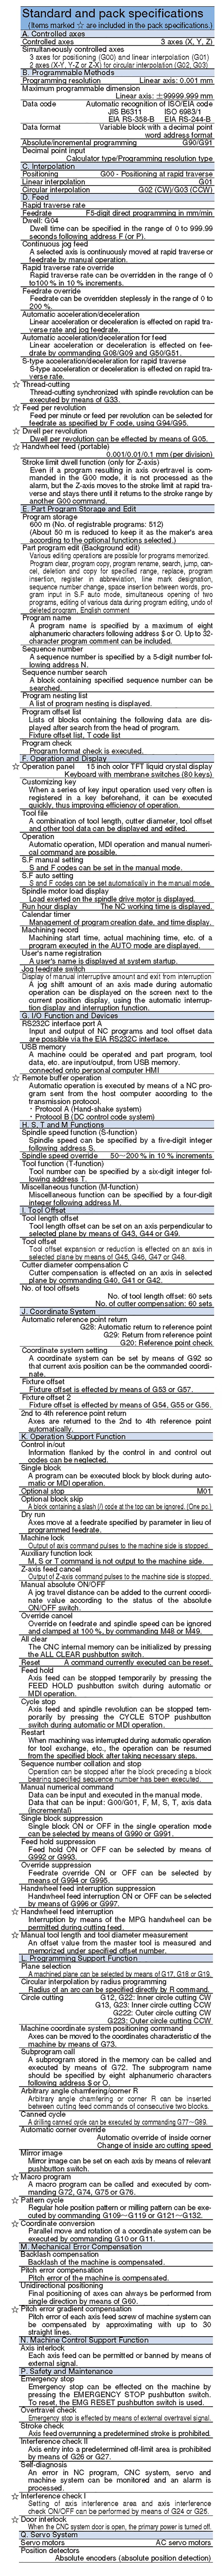 Standard and pack specifications